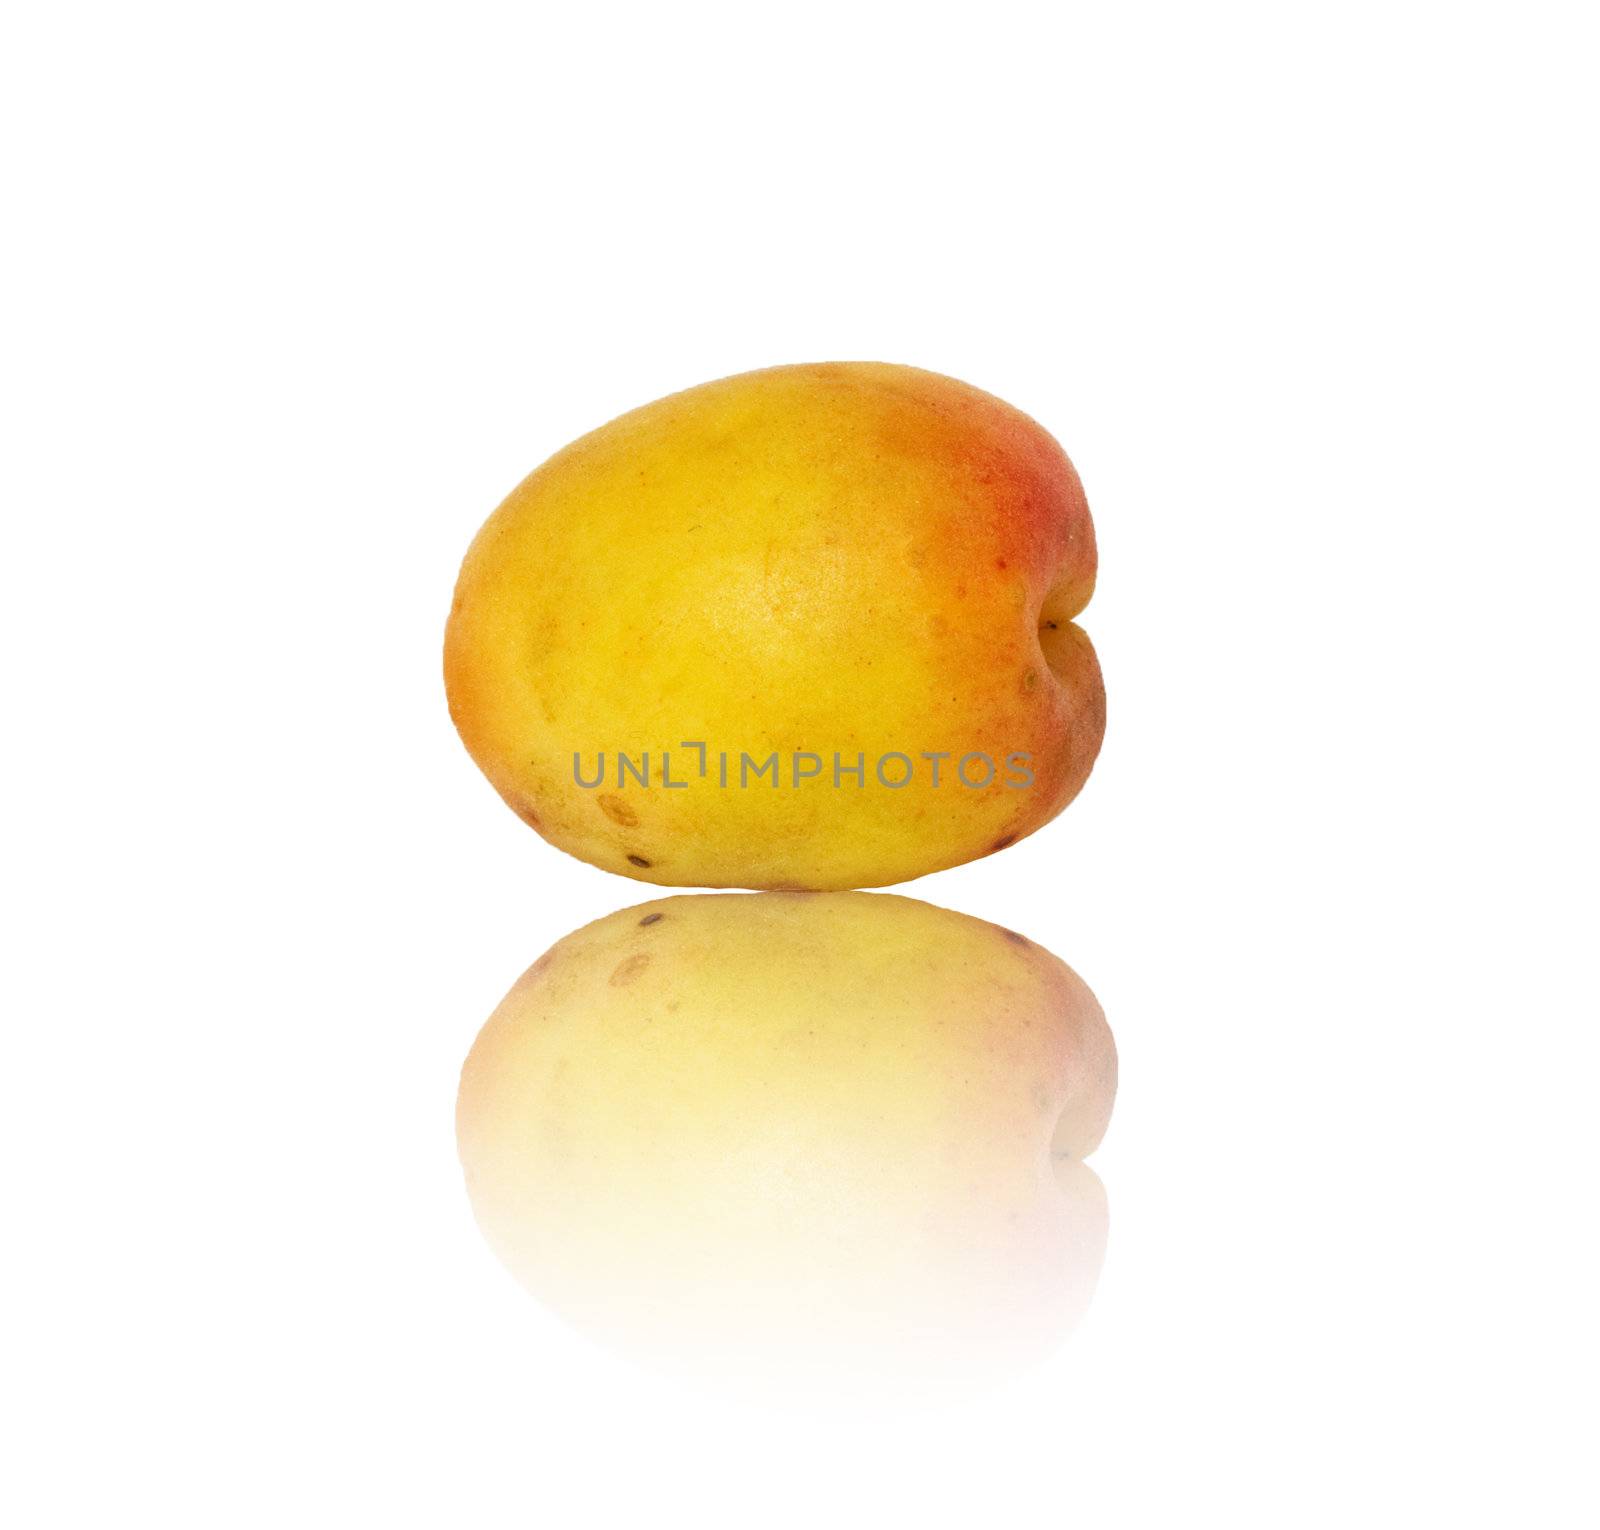 Fresh and ripe apricot isolated on a white background 